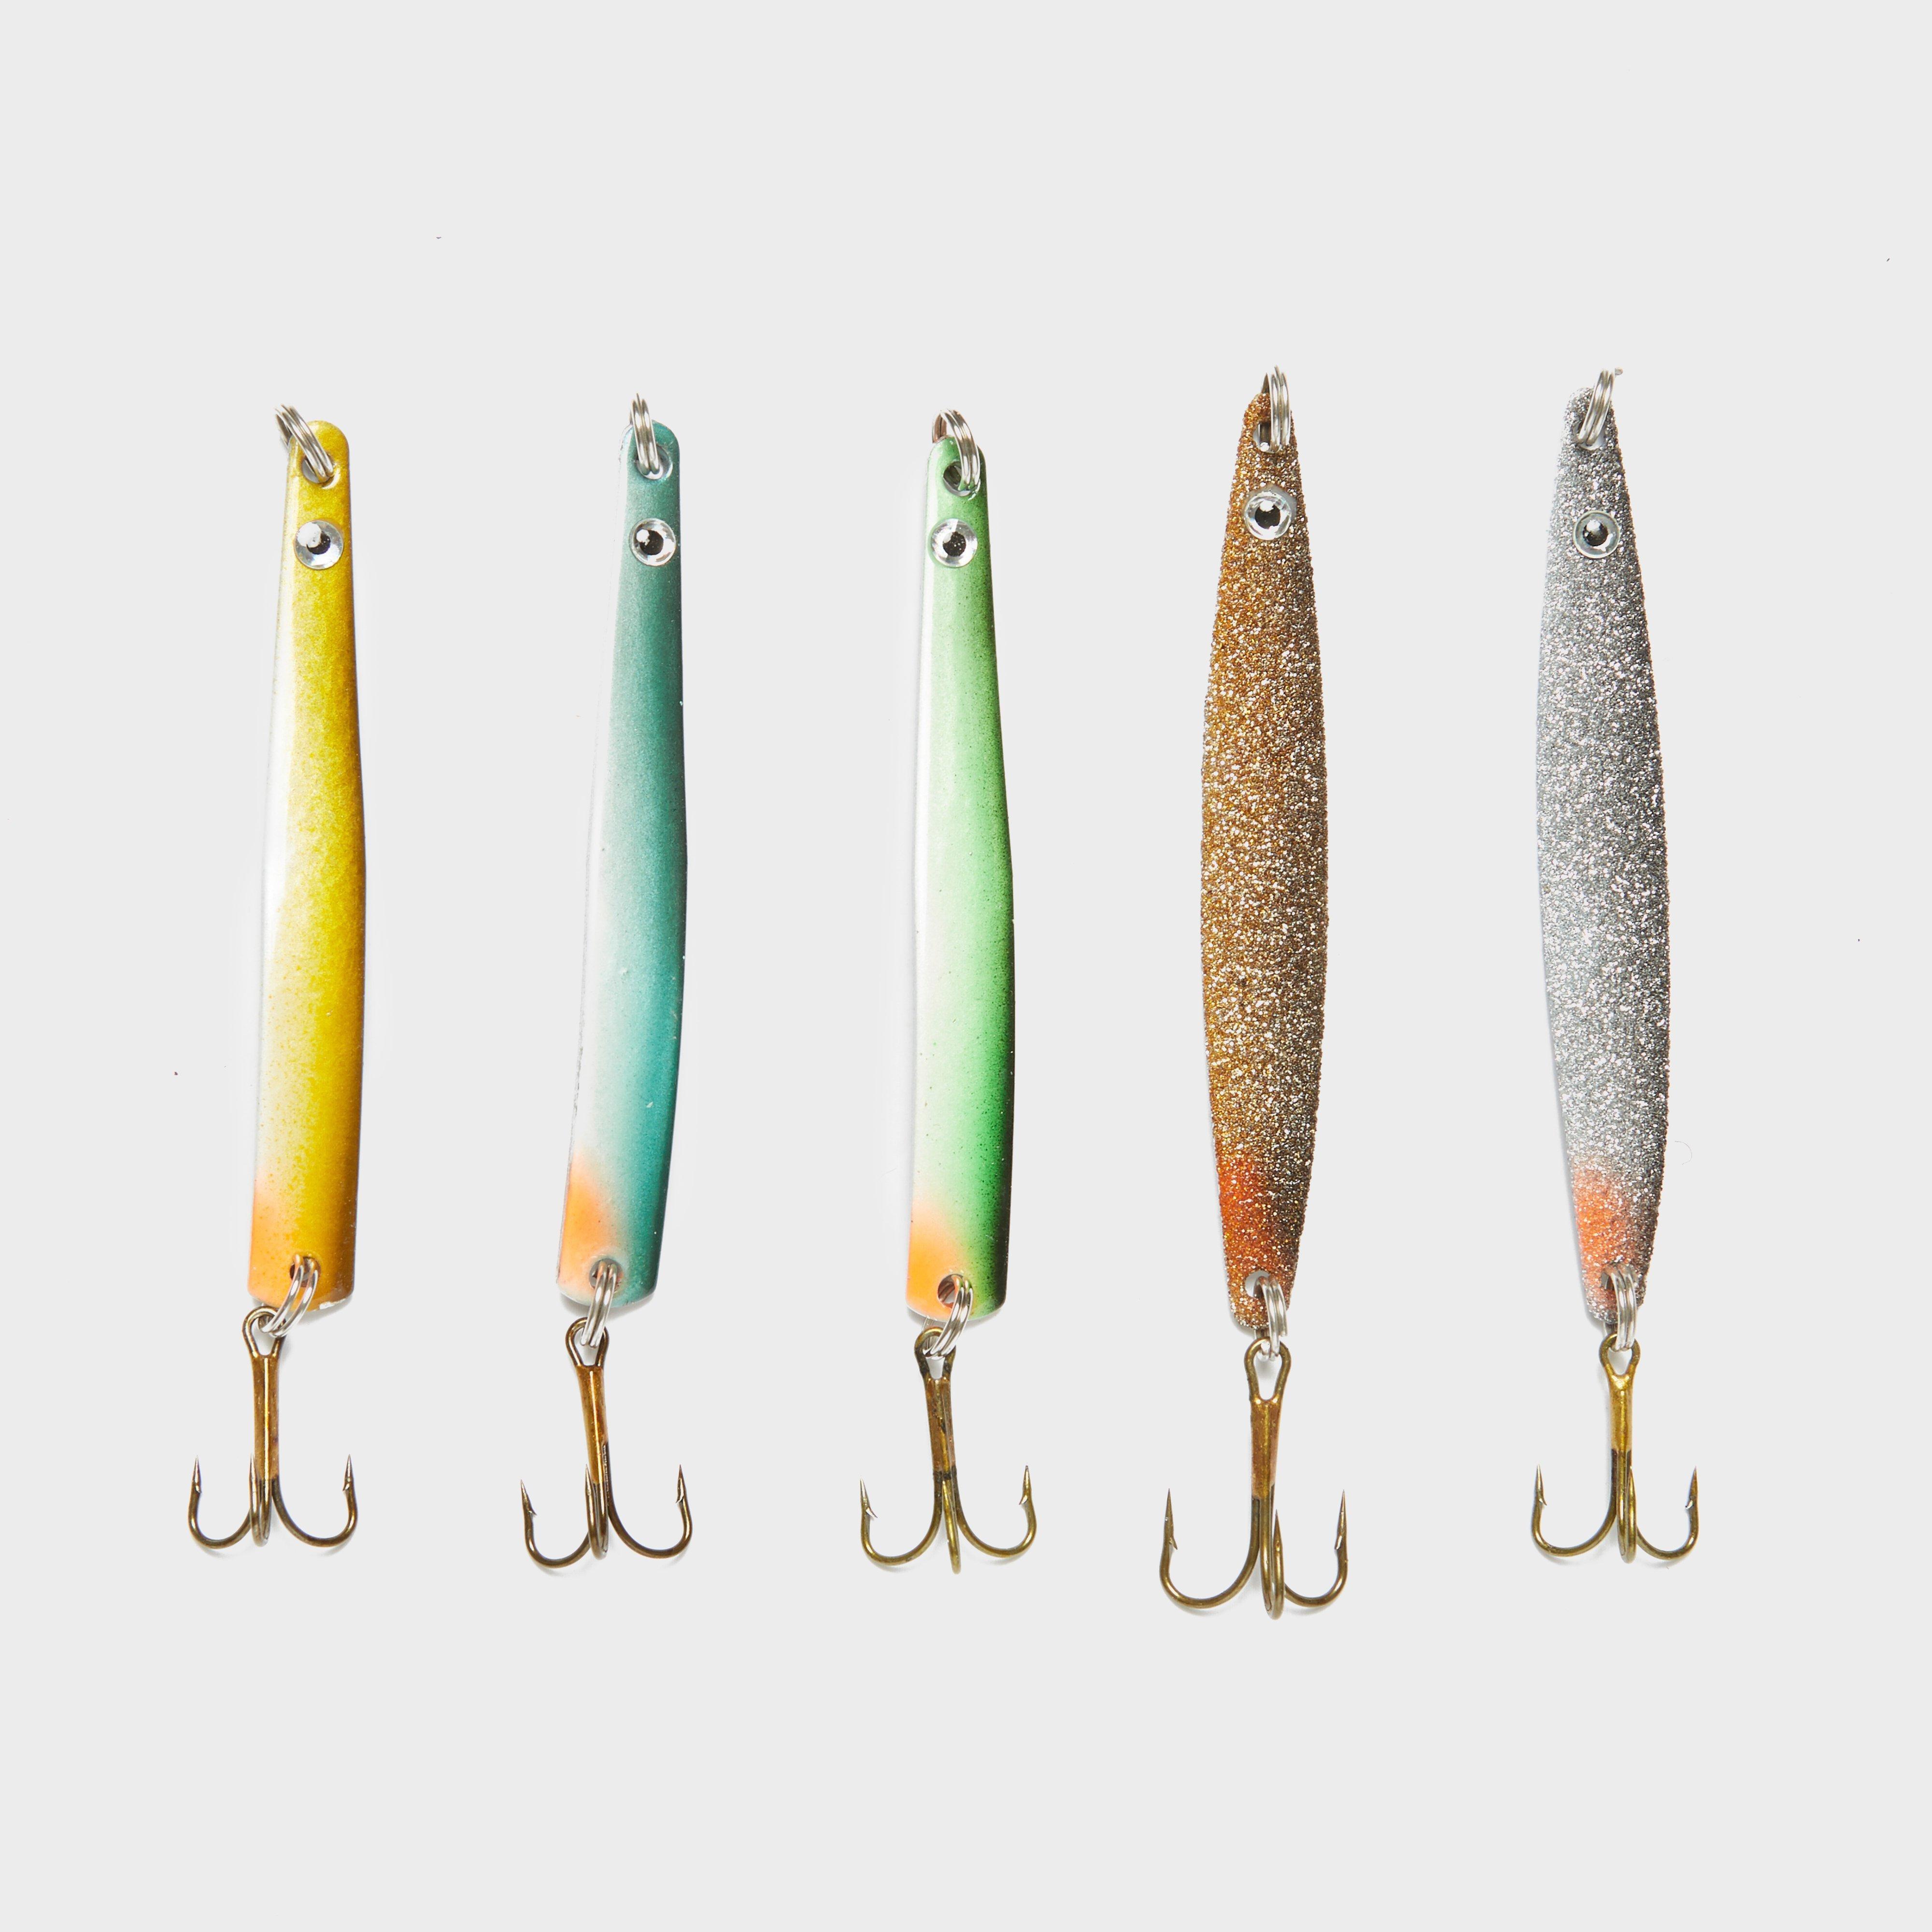 Ron Thompson Sea Trout Lures 16g – 5 Pack Review